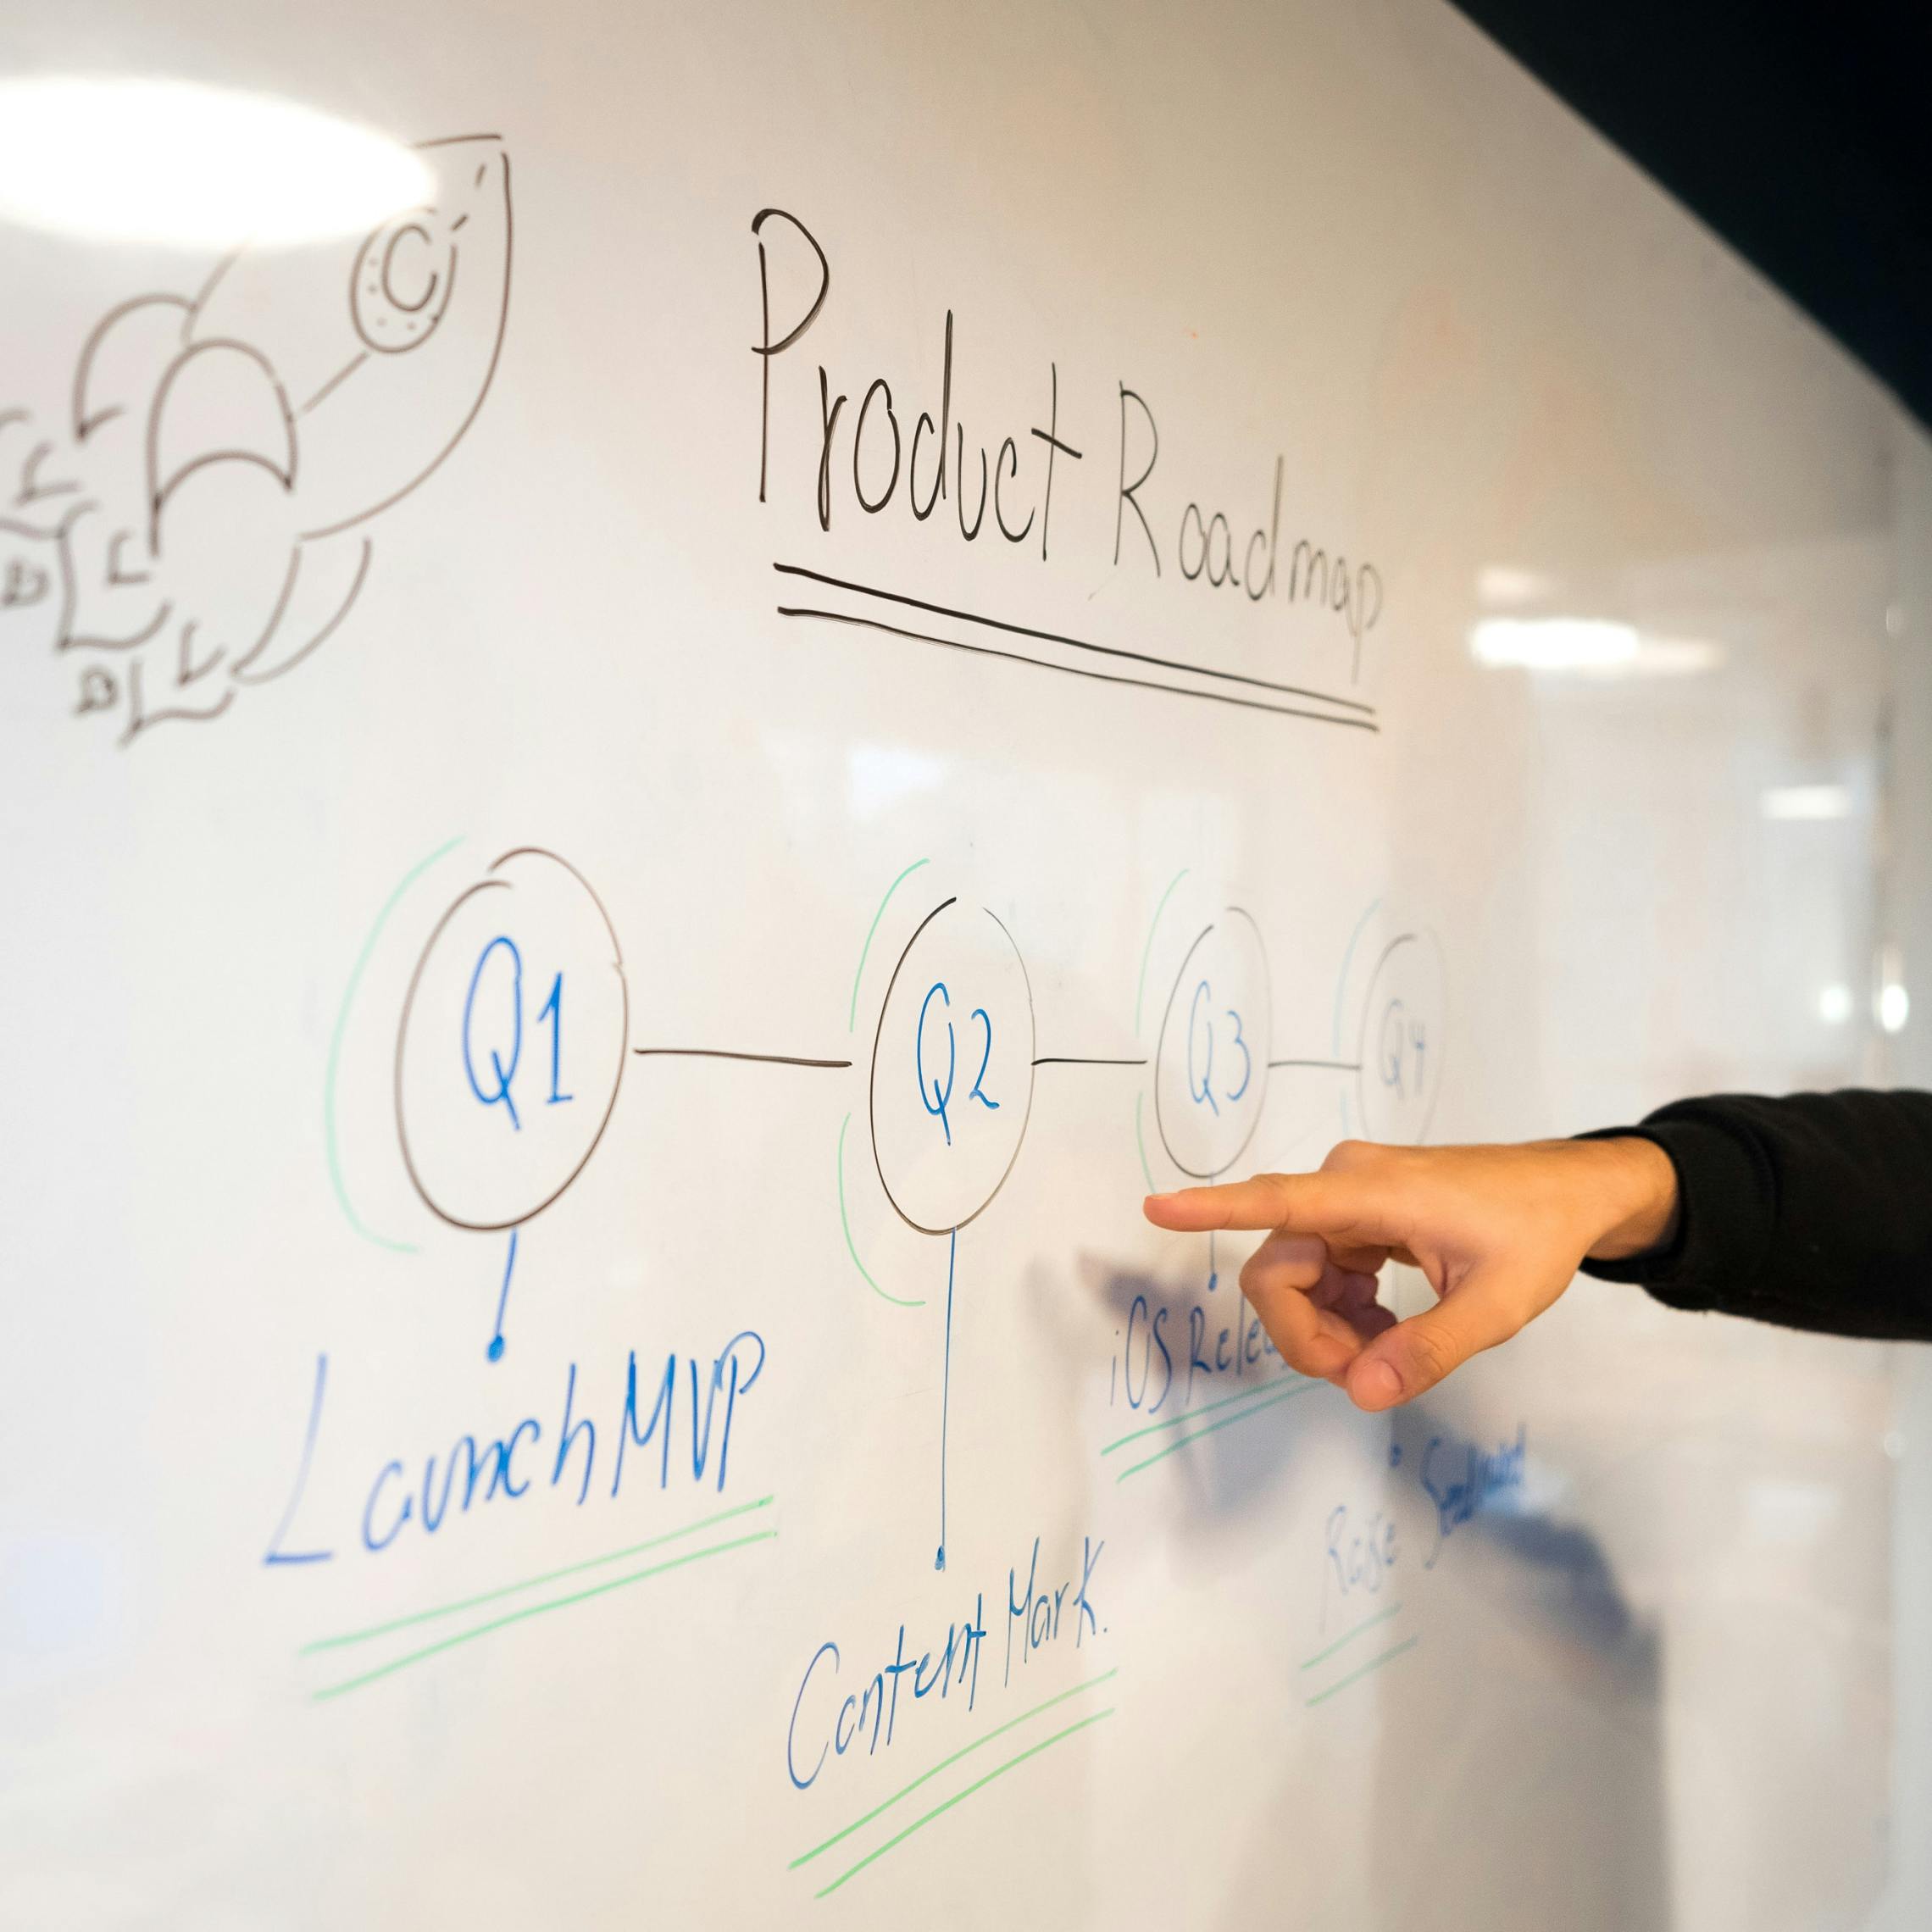 A product roadmap being discussed on a whiteboard.